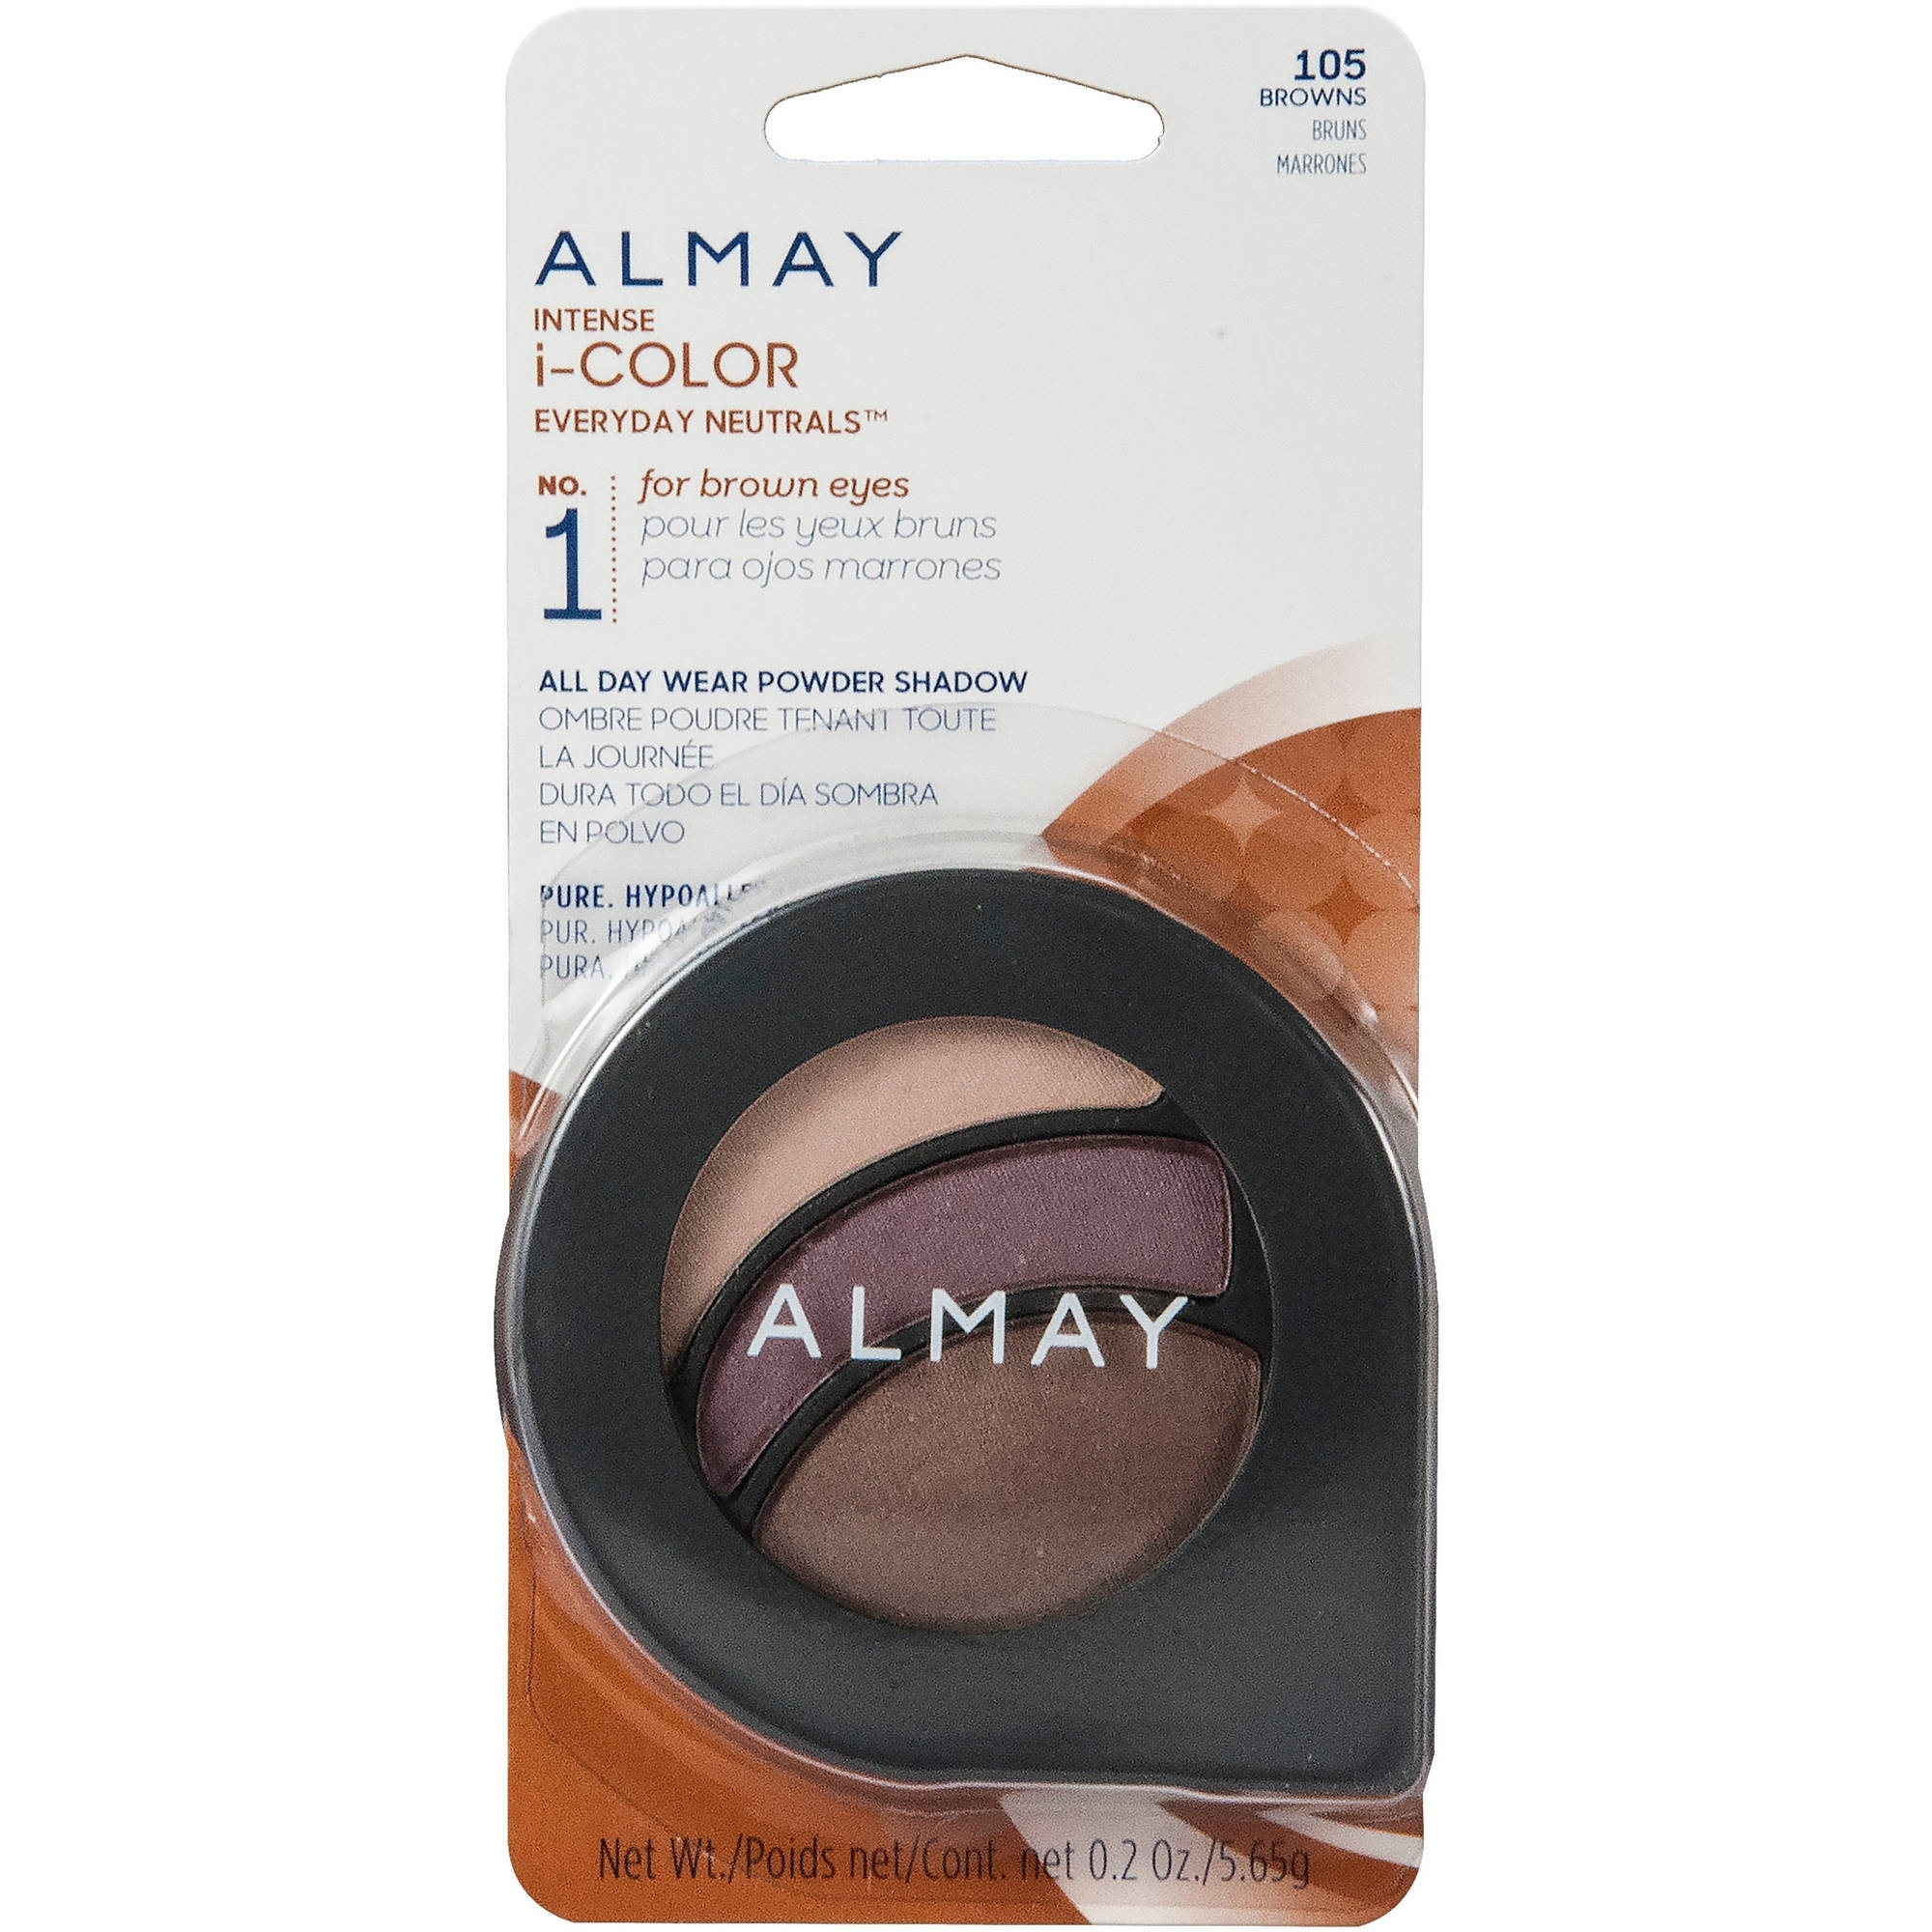 Almay Intense I-Color Everyday Neutrals All Day Wear Powder Eye for How To Use Almay Intense I-Color For Hazel Eyes